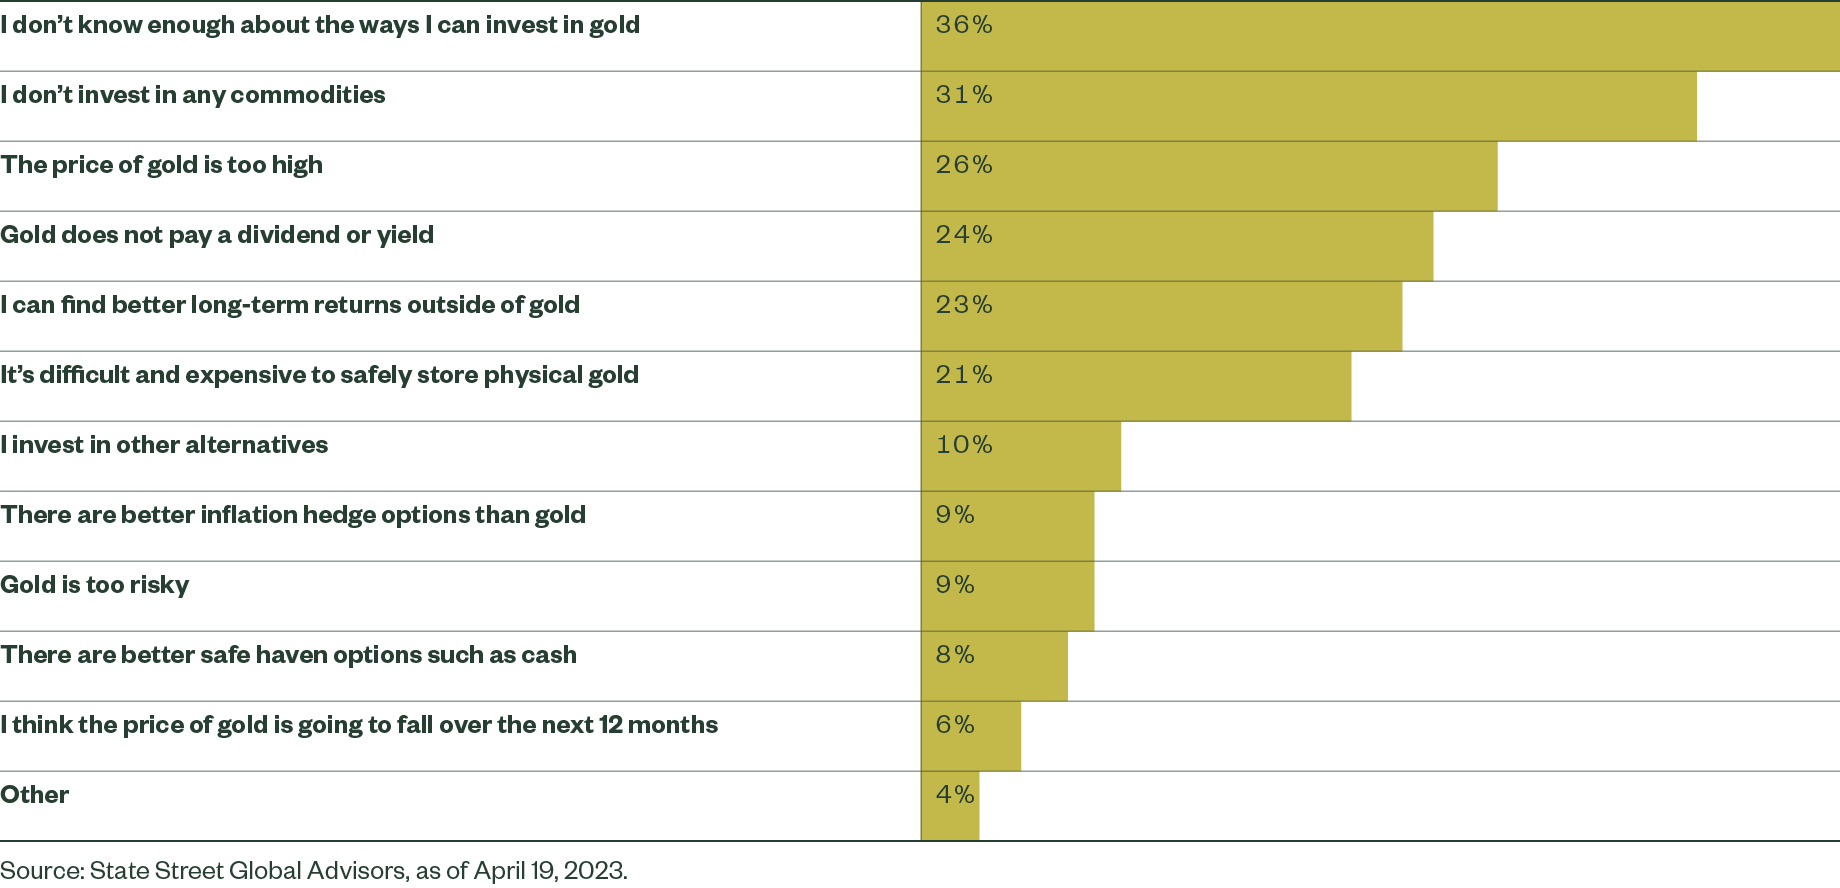 lack of Education Ranks as the Top Reason Investors Don’t Invest in Gold 